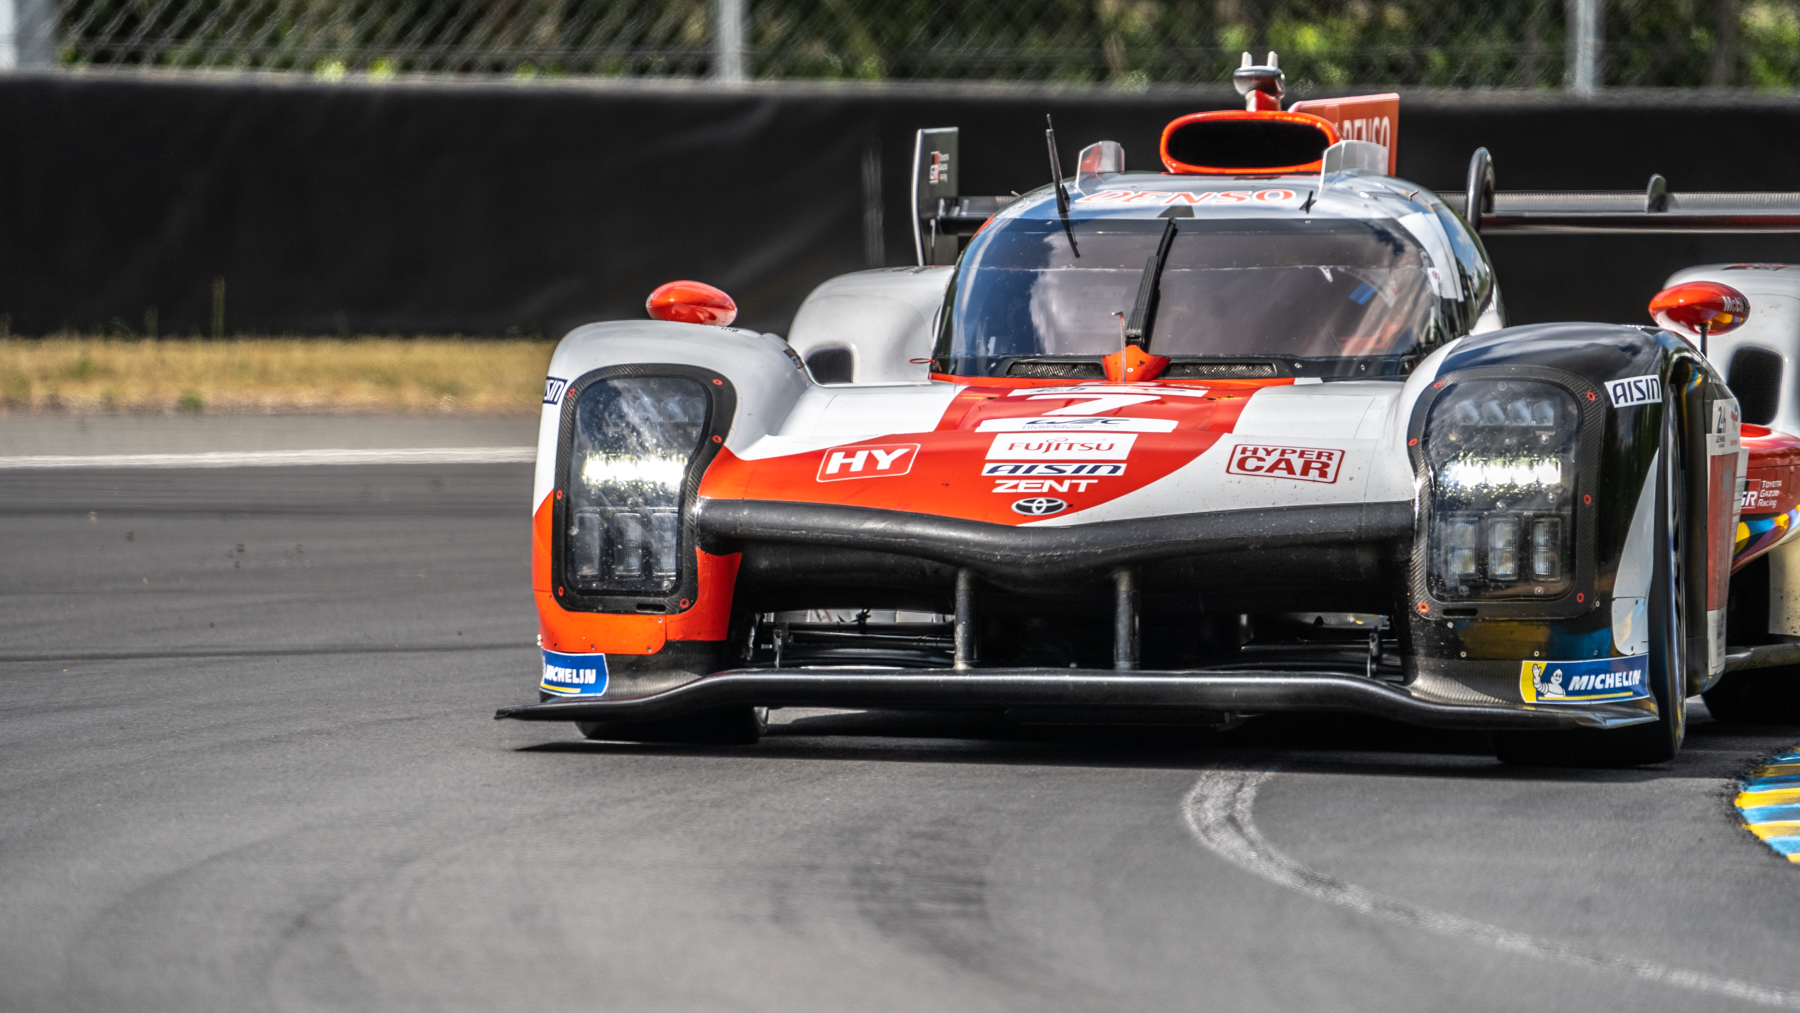 Le Mans 2022 technical gallery: Toyota GR010 | Professional Motorsport World